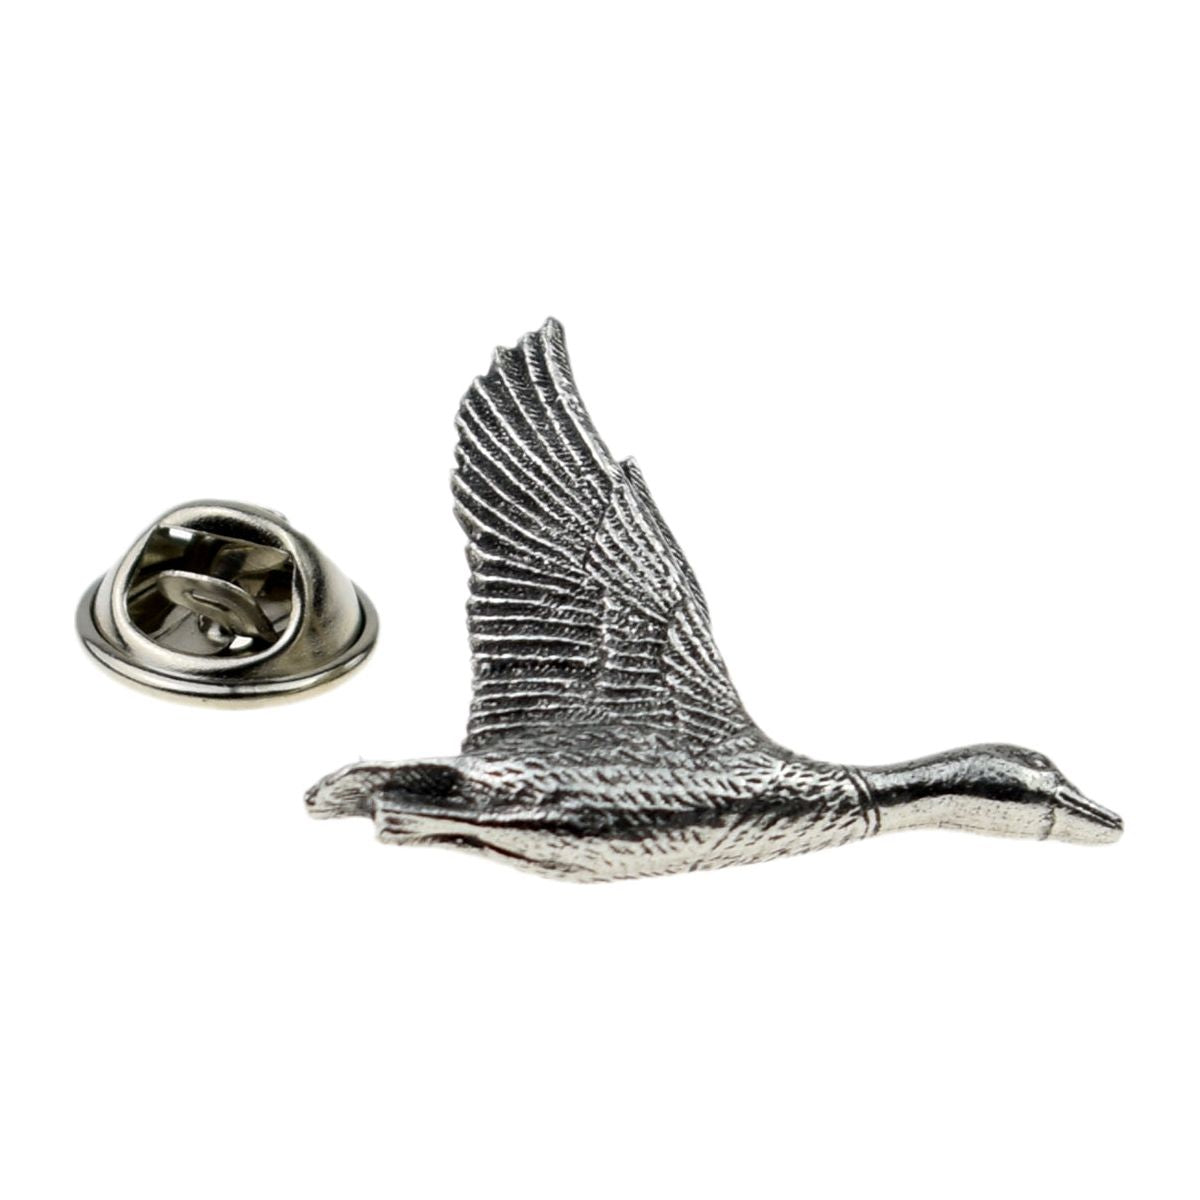 Duck in Flight Pewter Lapel Pin Badge - Ashton and Finch